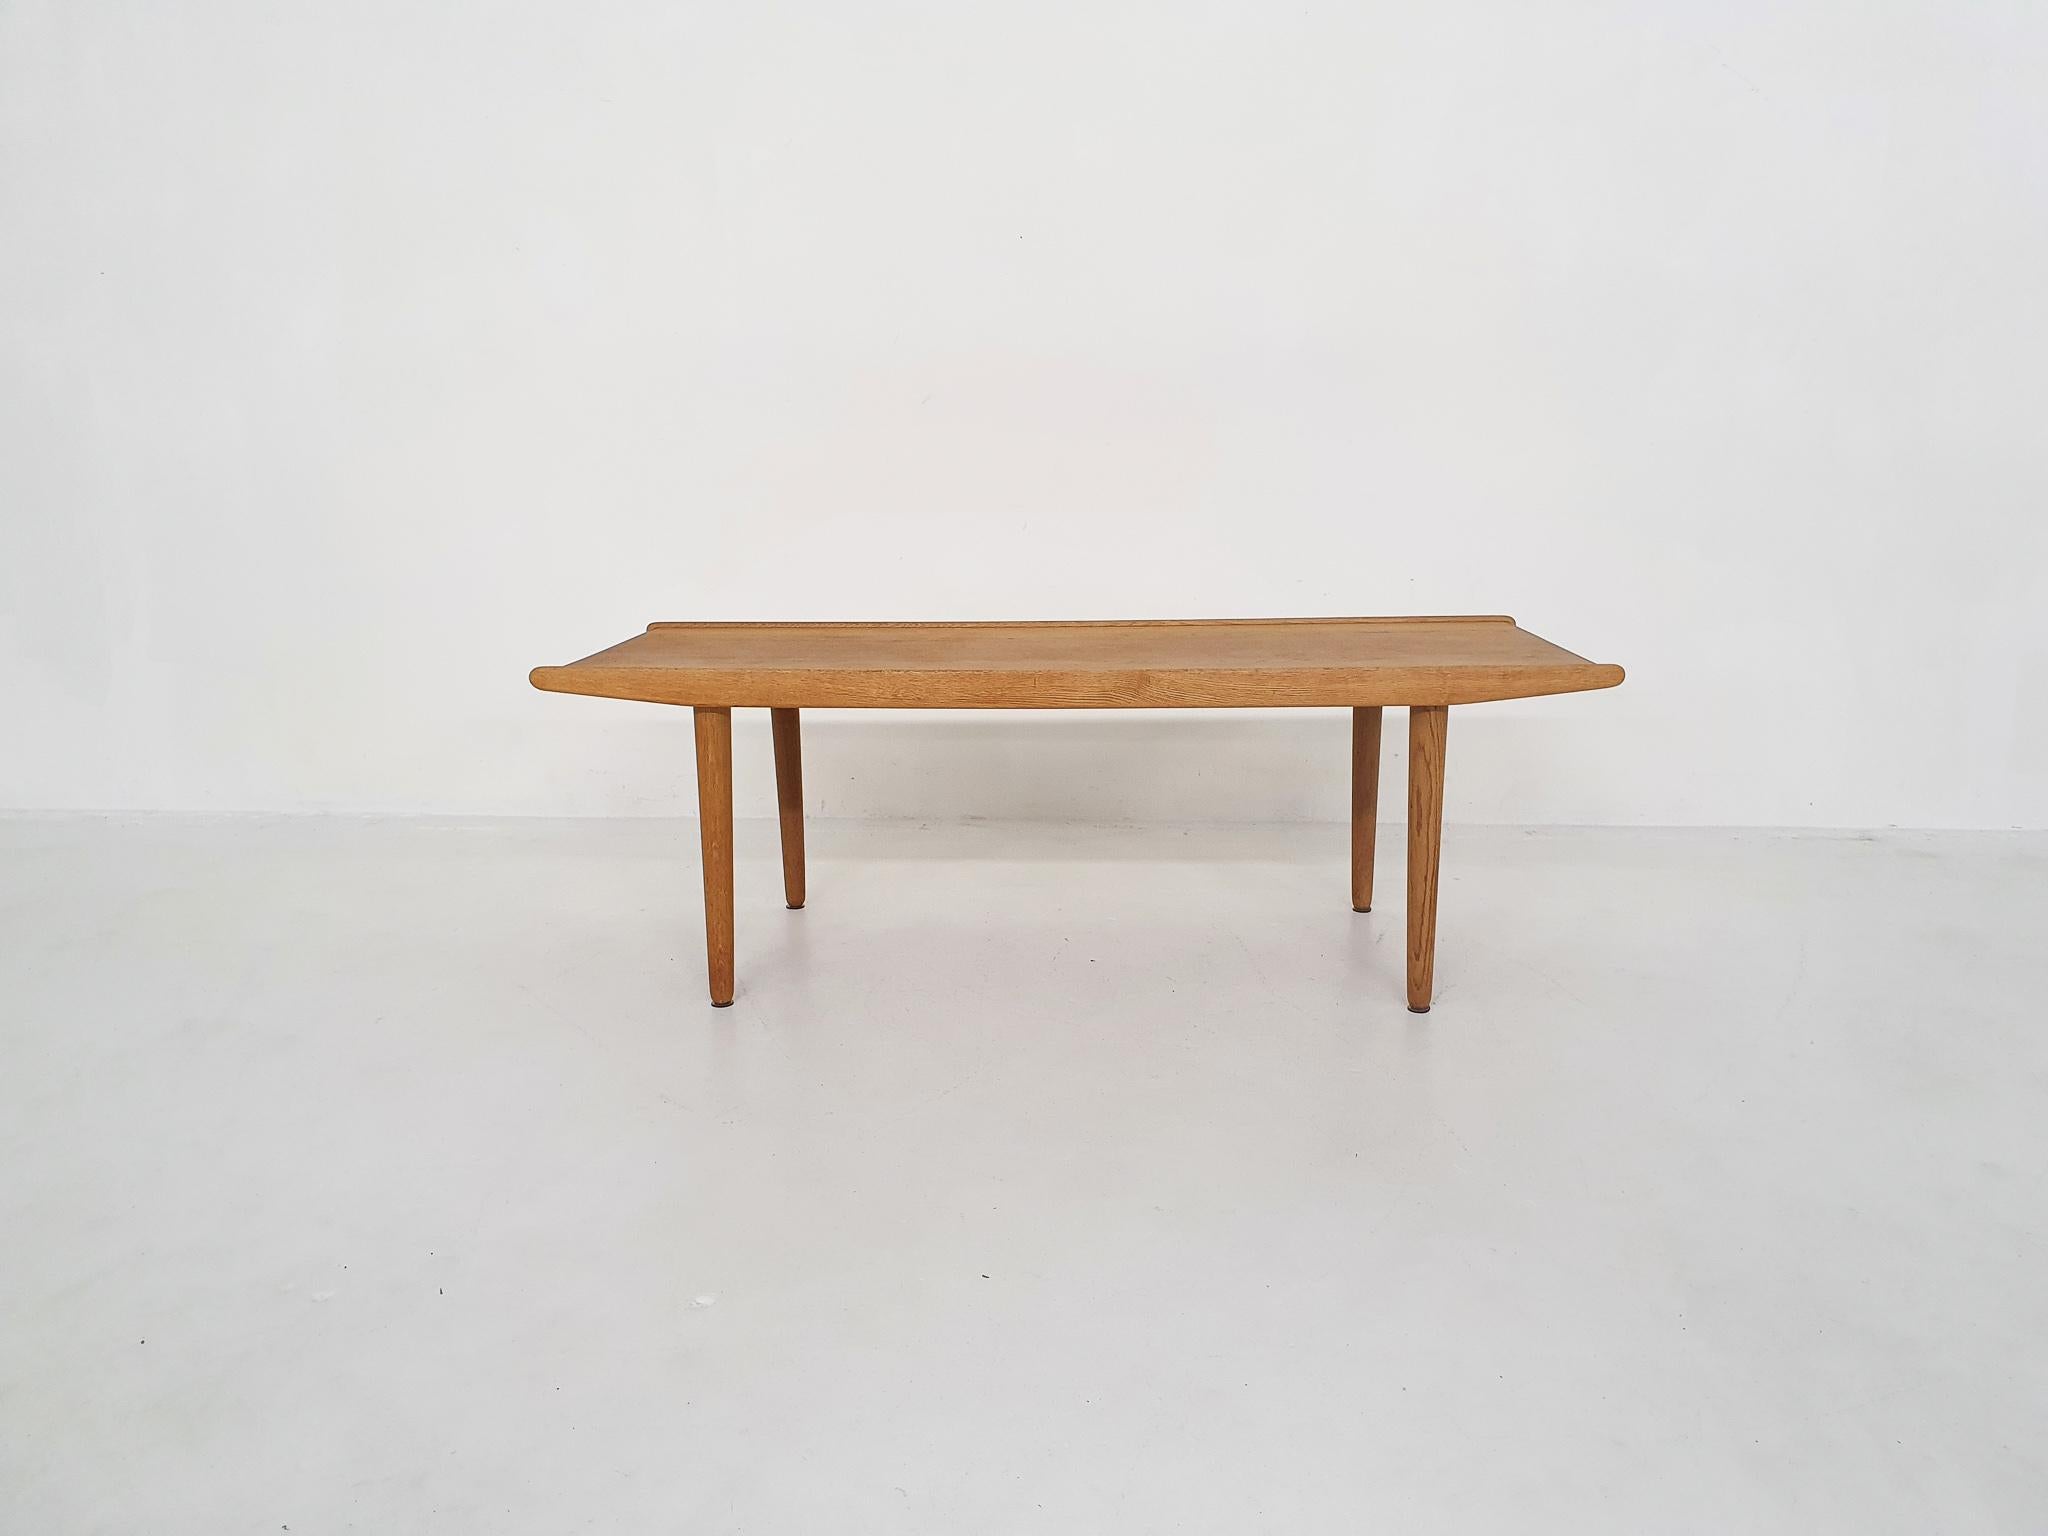 Oak coffee table by Frem Rojle. Some small water stains on the top.